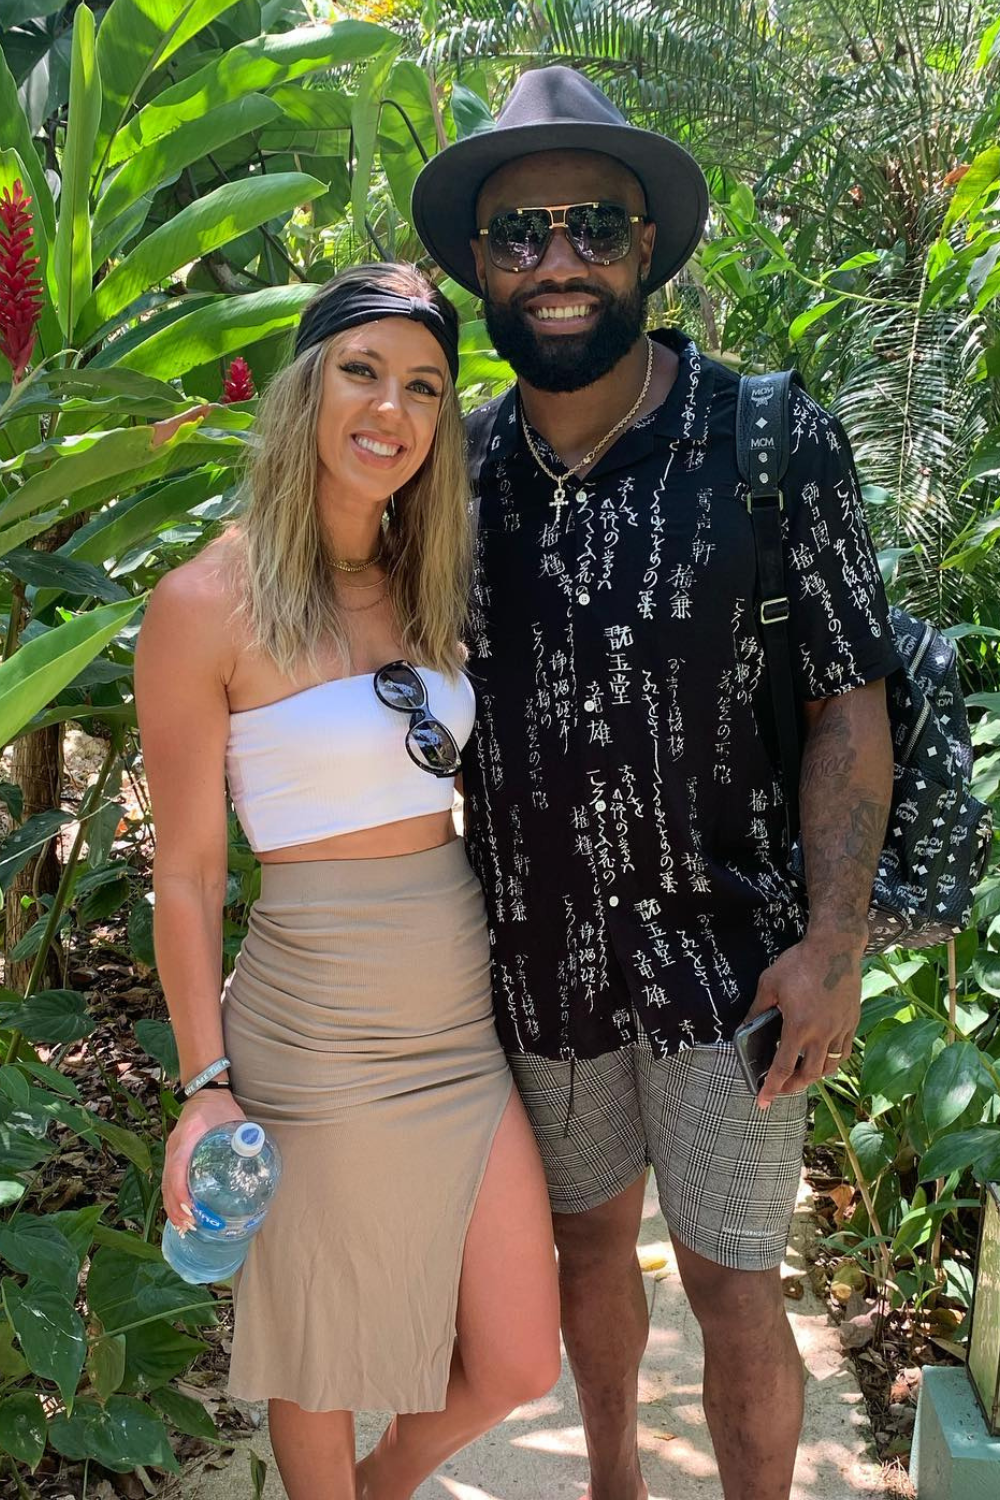 Everson Griffen And His Wife Tiffany Brandt During Their Vacation To Costa Rica